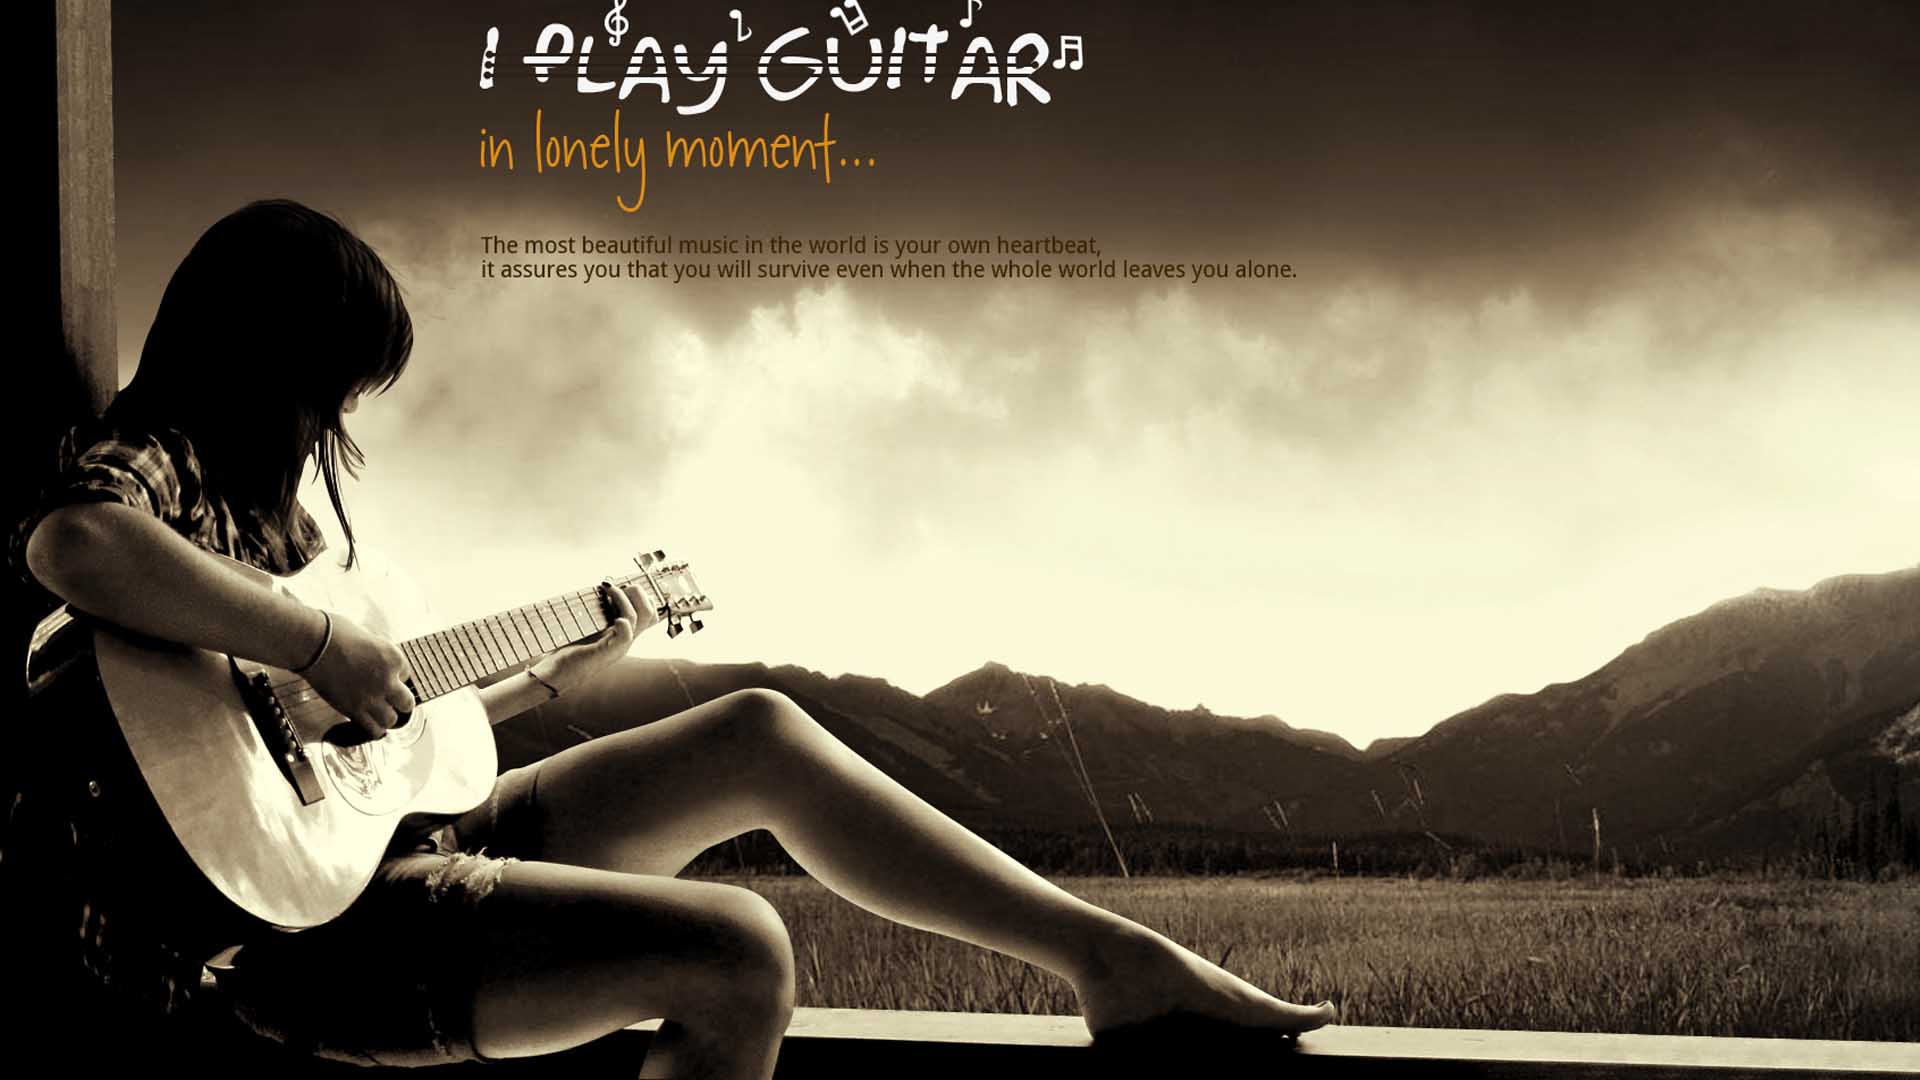 wallpaper of girl with guitar,guitar,music,guitarist,plucked string instruments,acoustic guitar